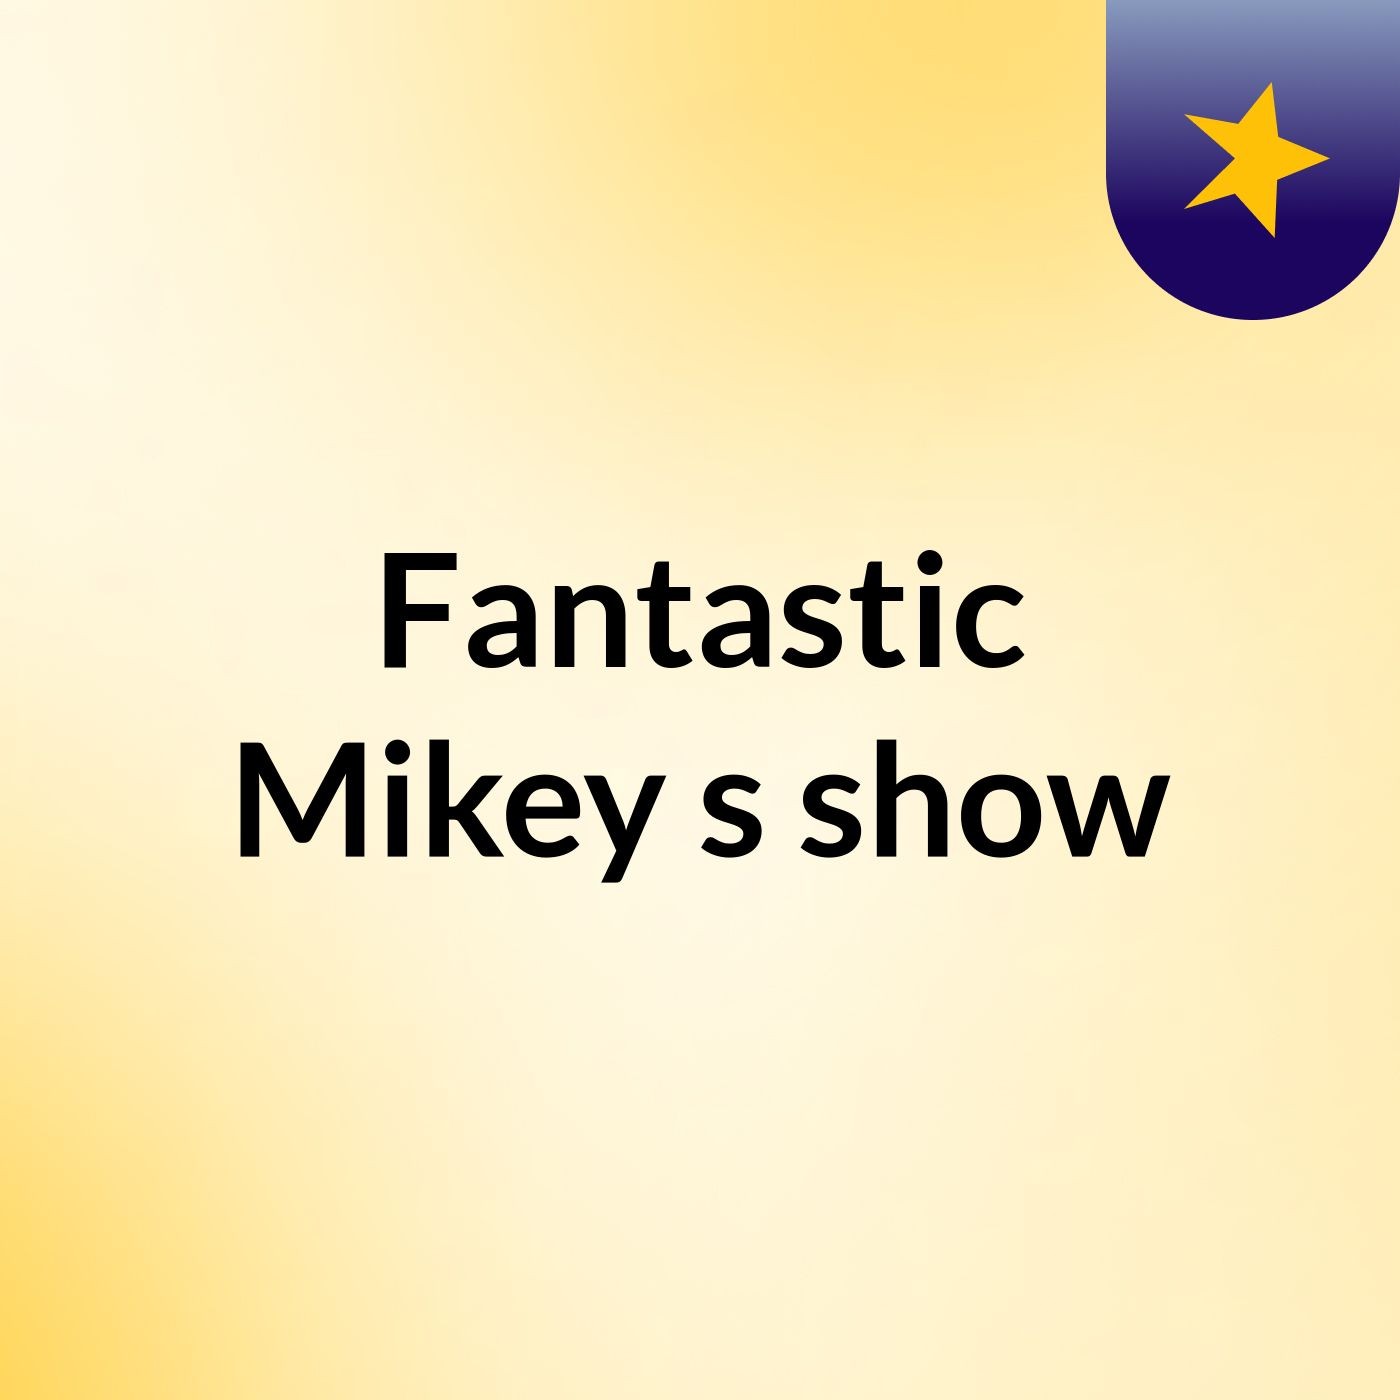 Fantastic Mikey's show